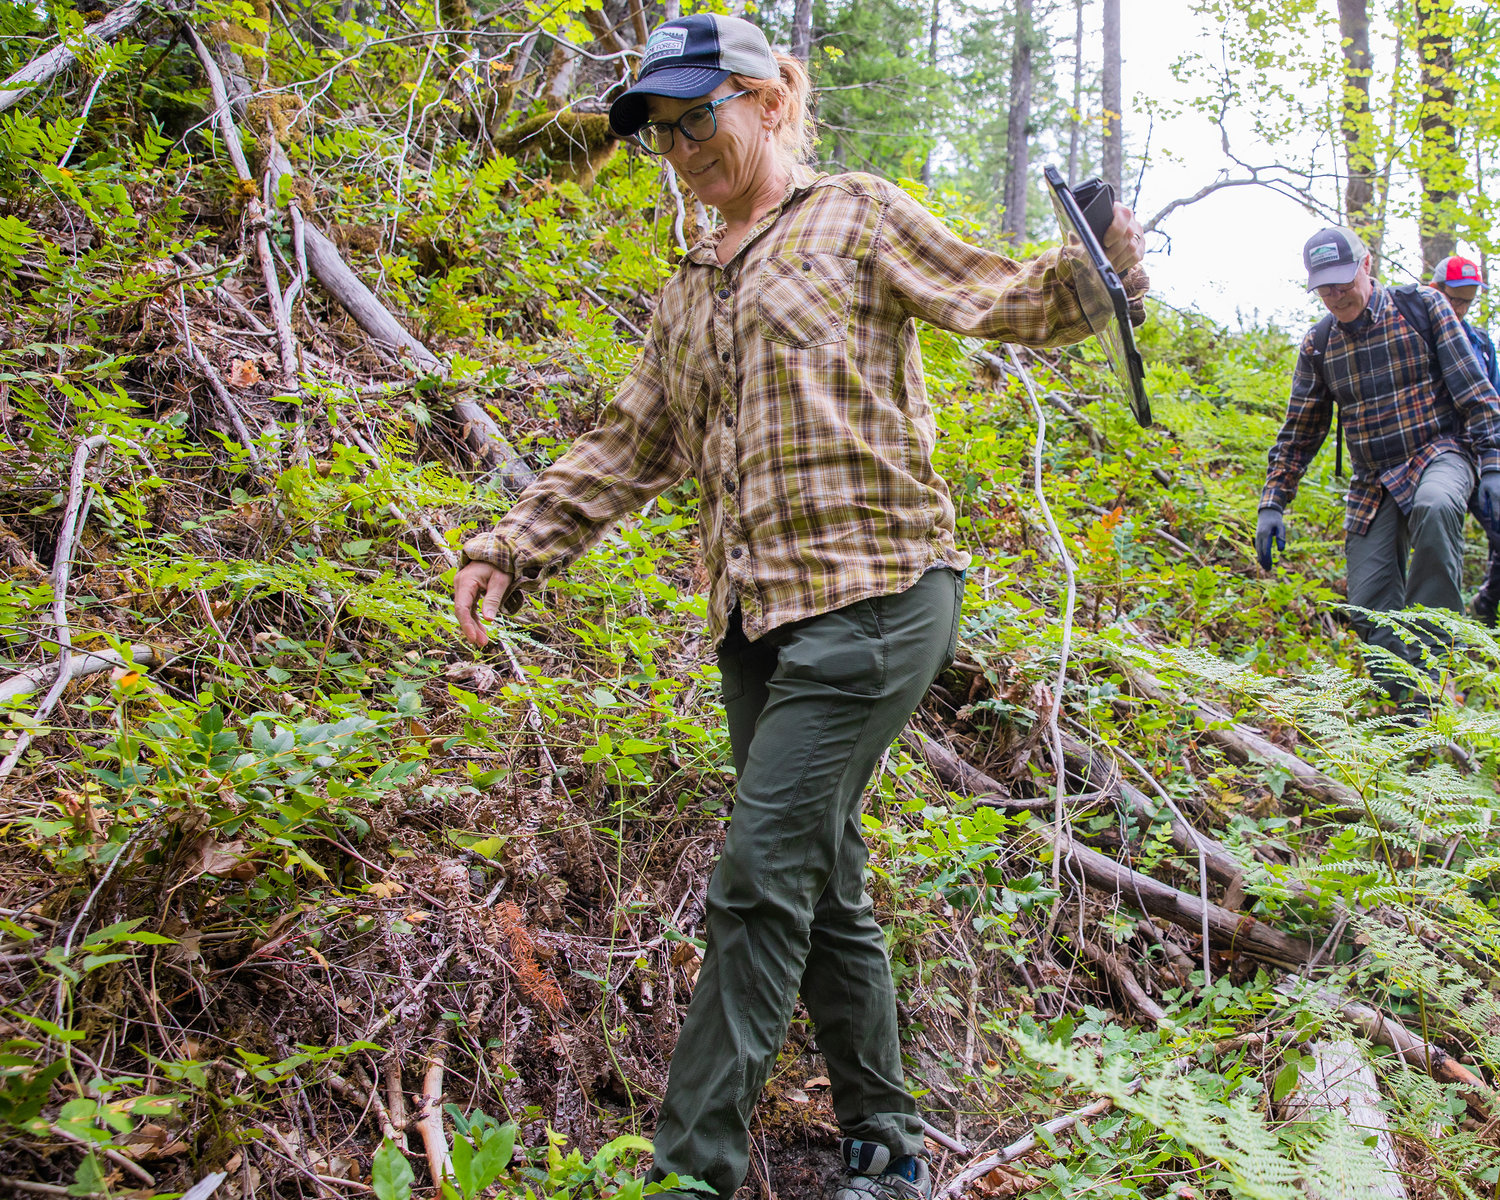 Kim Freeman smiles while searching for a game camera alongside Jeff Green and Brian Yellin Saturday morning in the Gifford Pinchot National Forest in Lewis County.